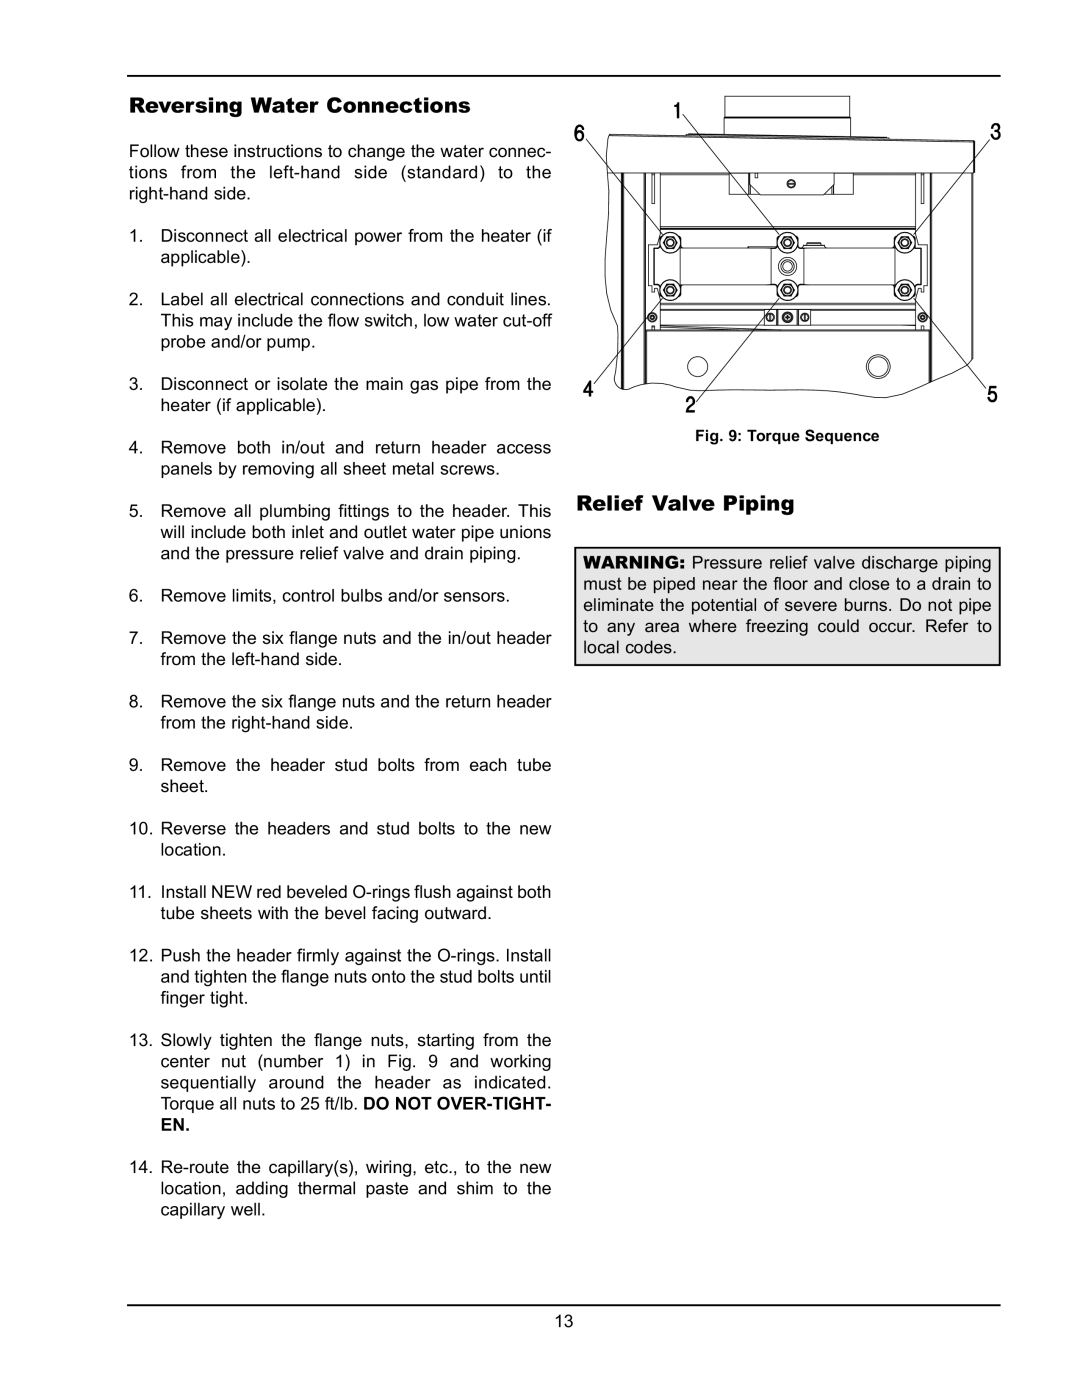 Raypak HD101, HD401 operating instructions Reversing Water Connections, Relief Valve Piping 